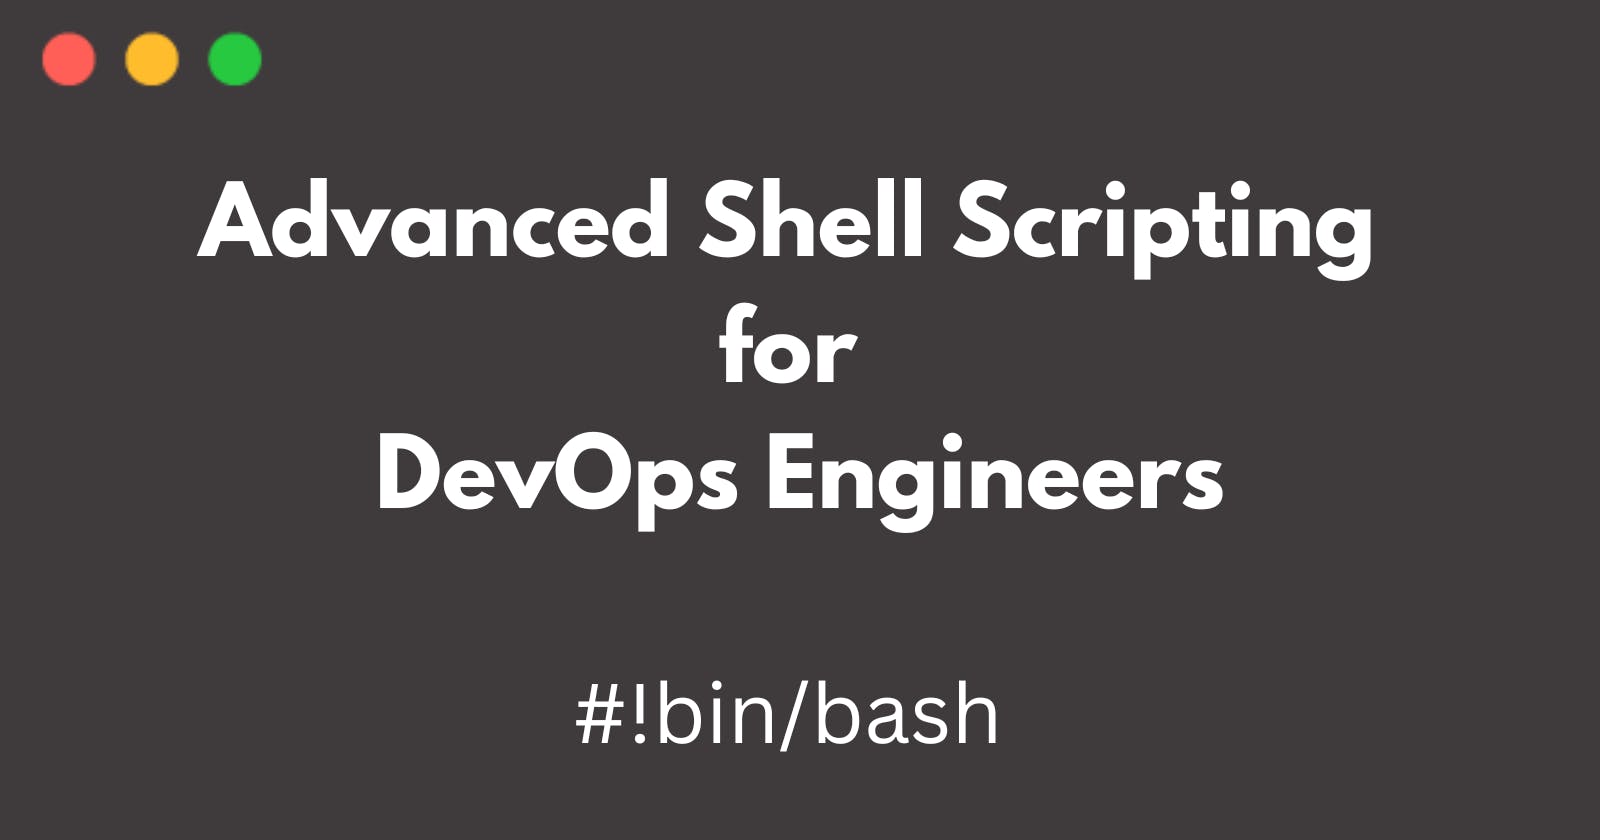 Day 5 Task: Advanced Linux Shell Scripting for DevOps Engineers with User management